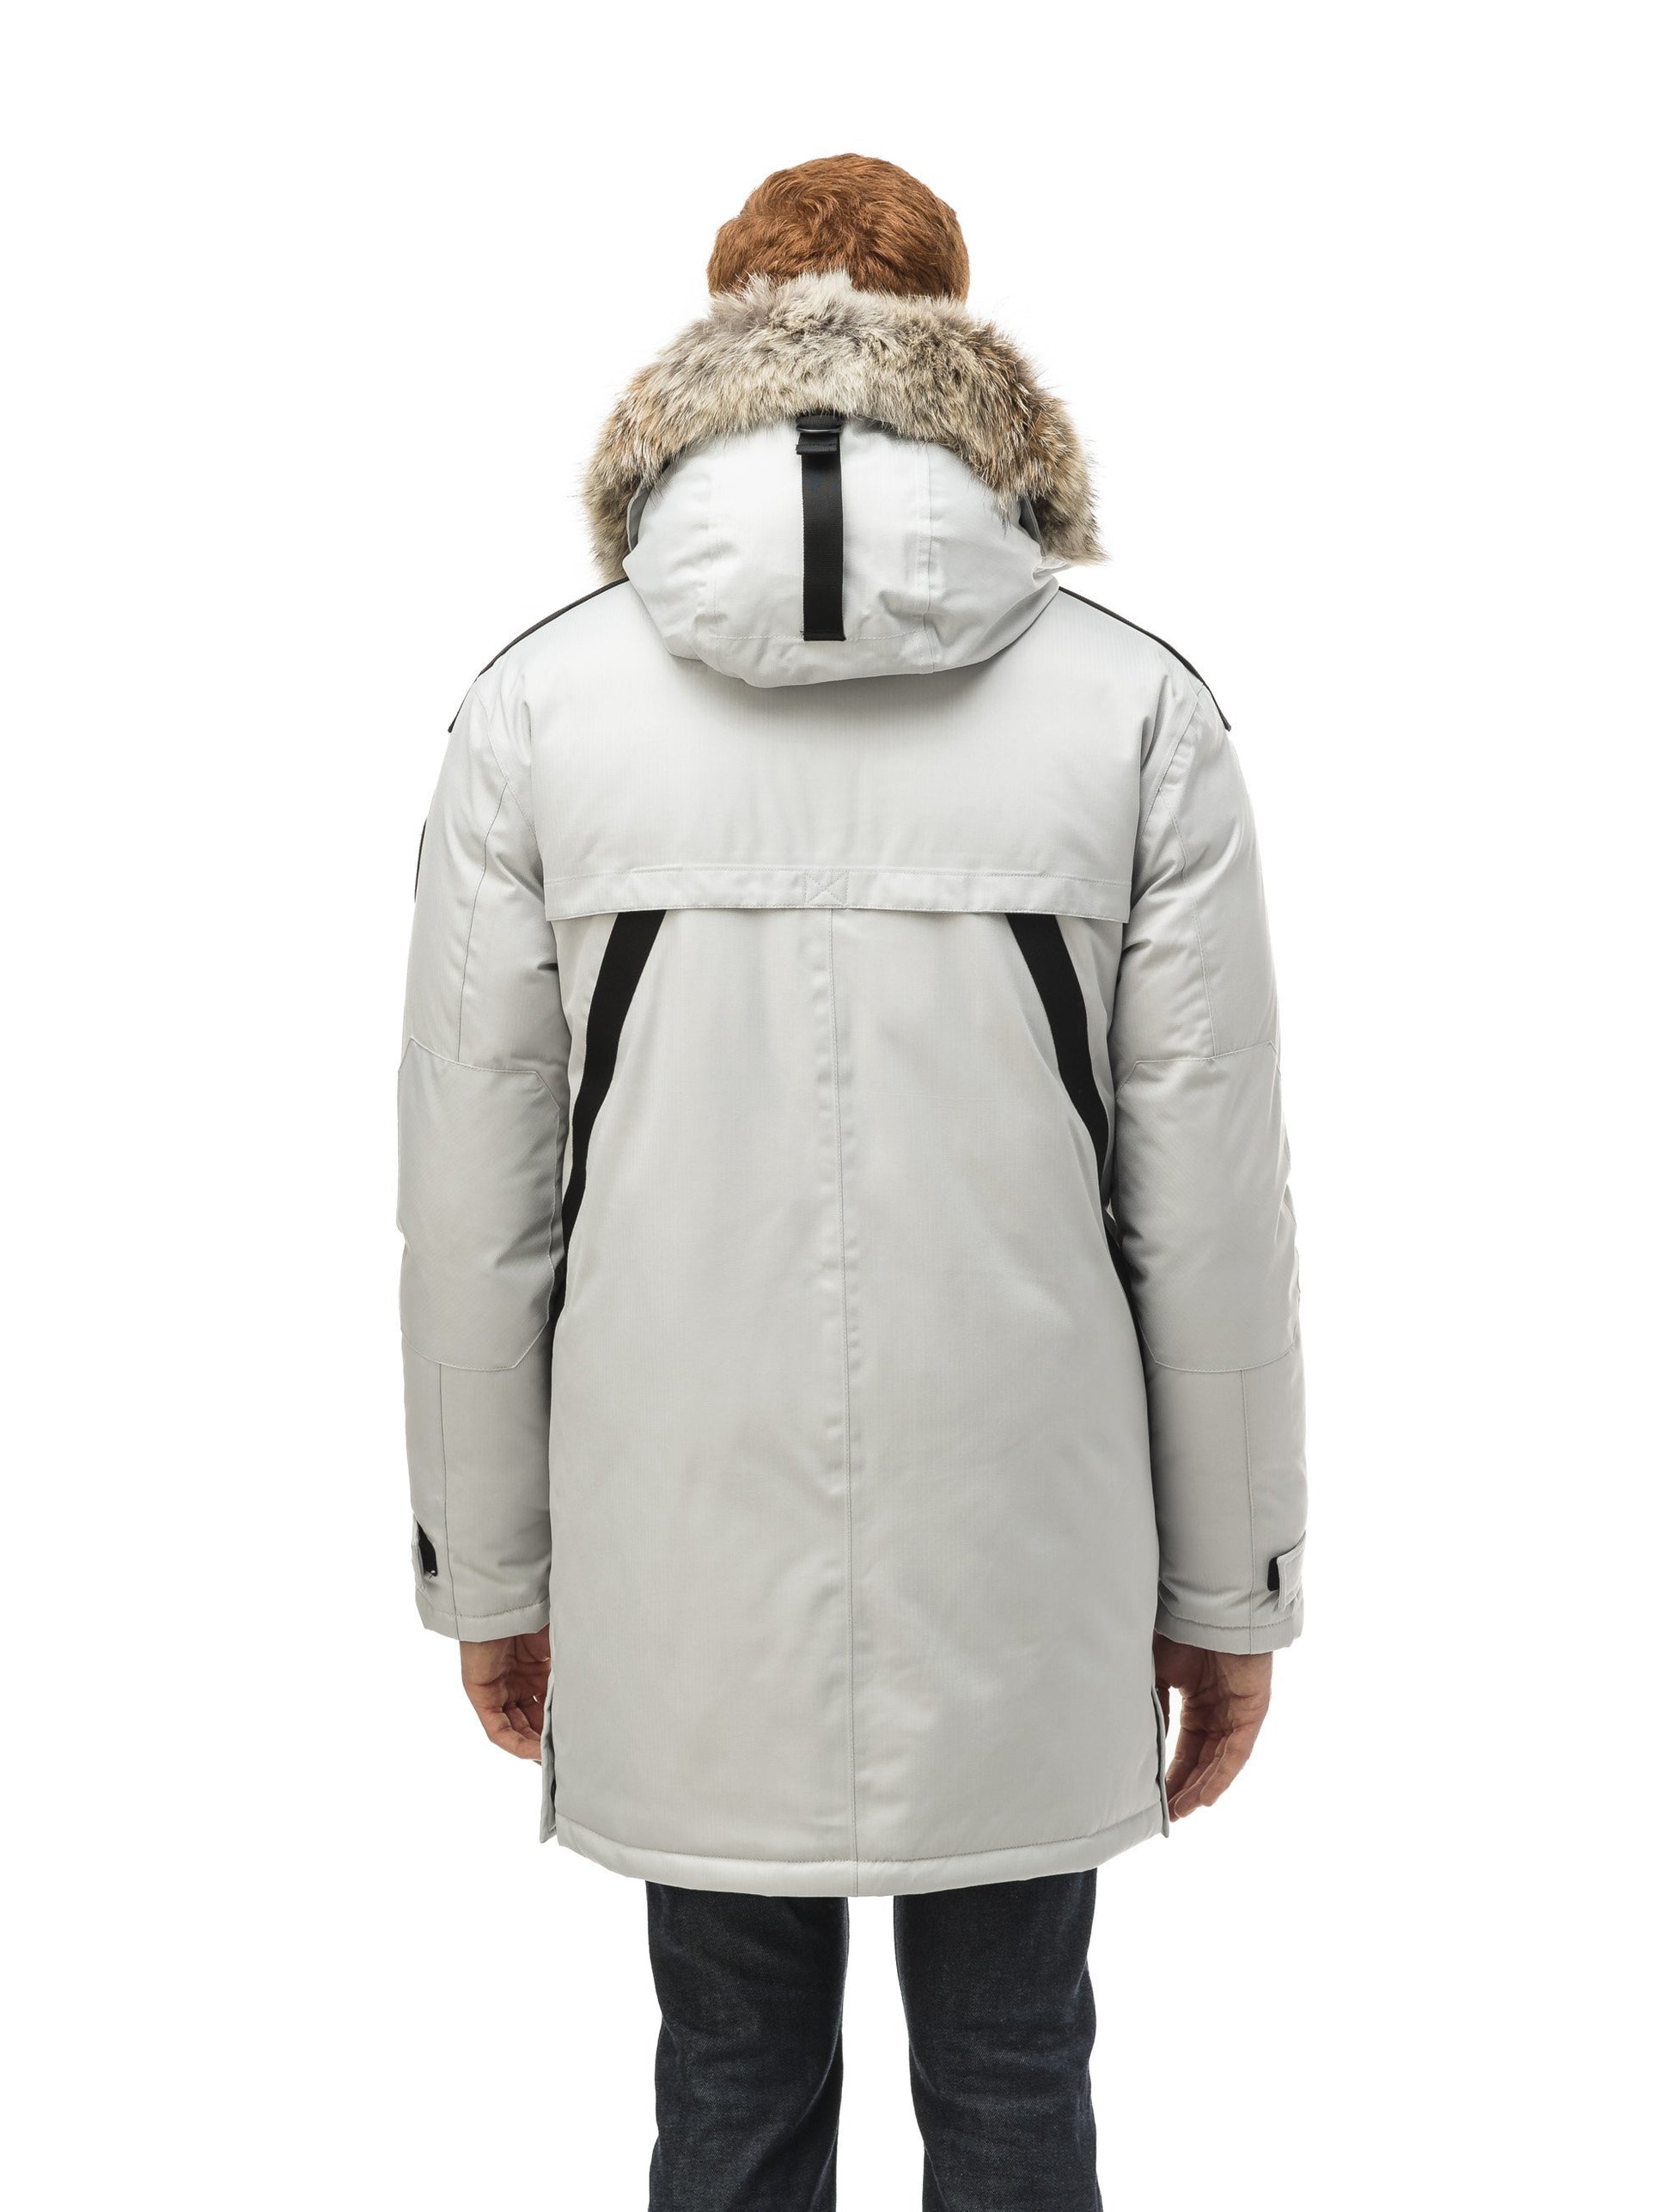 Men's Best Selling Parka the Yatesy is a down filled jacket with a zipper closure and magnetic placket in CH Light Grey